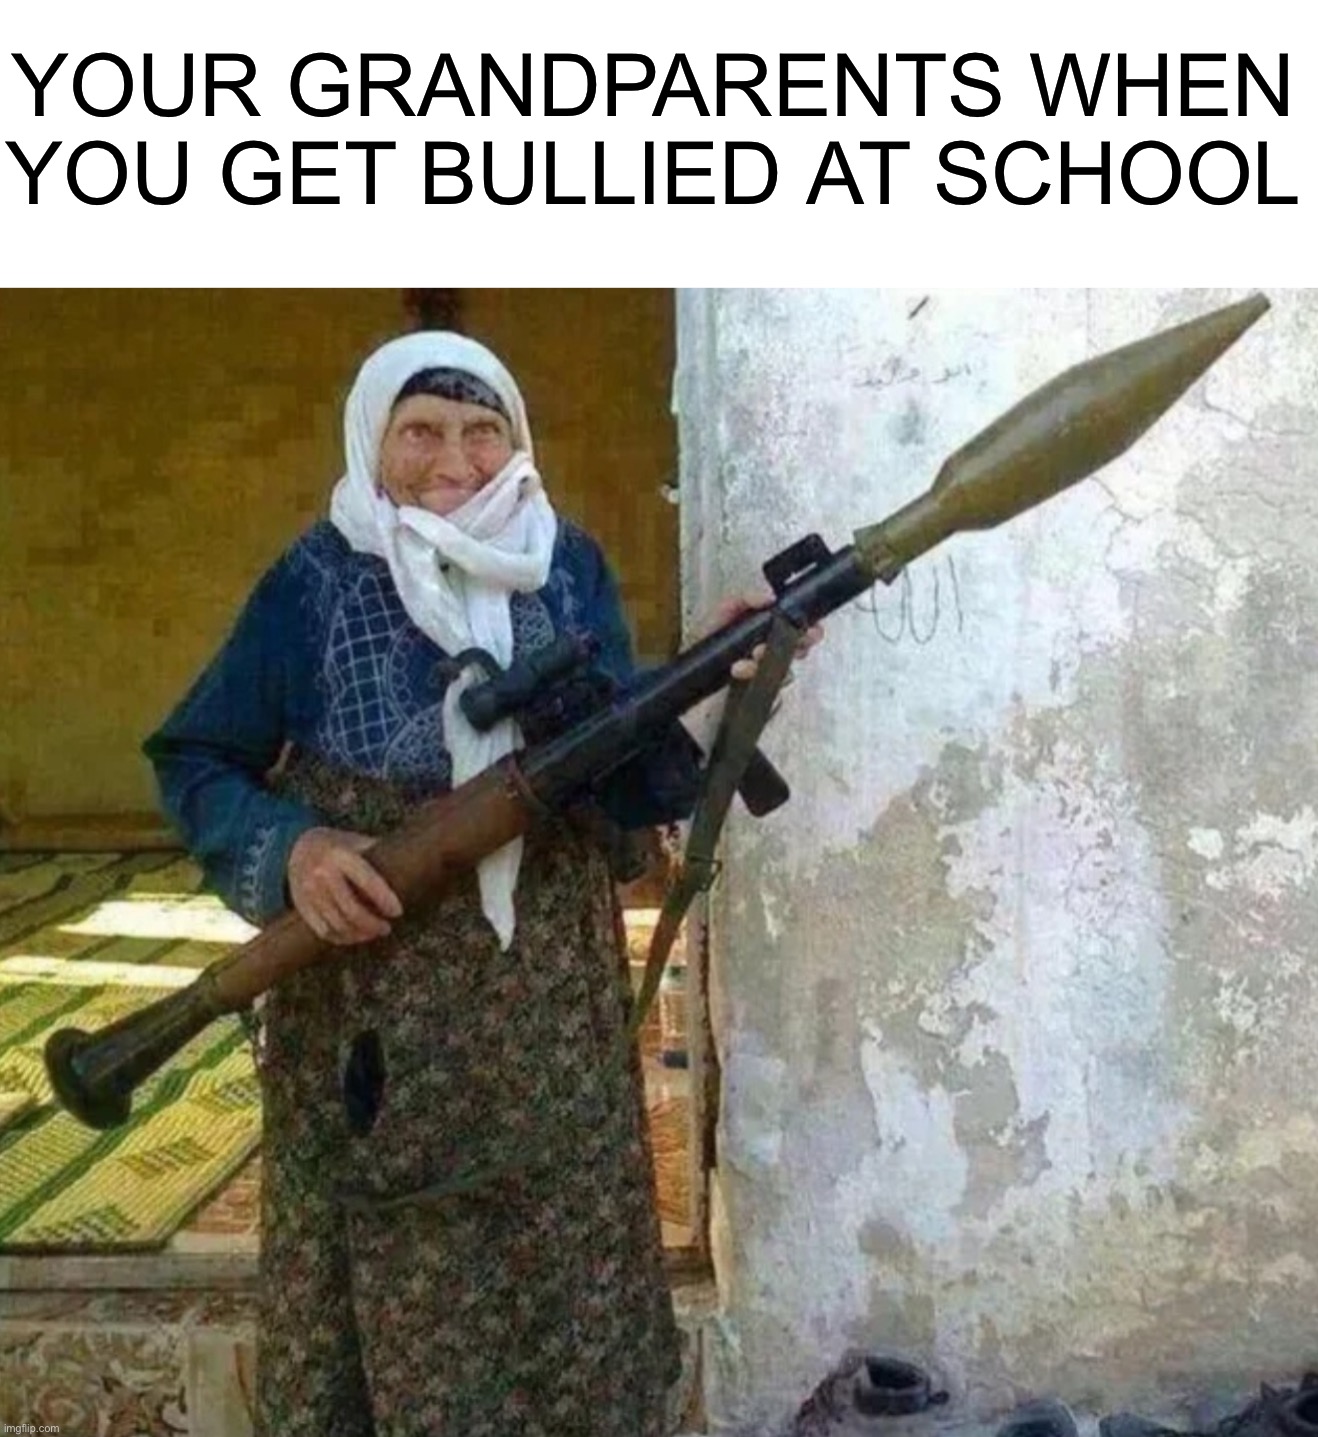 “I’ll take the Benelli M4” “Thanks Grandpa” |  YOUR GRANDPARENTS WHEN YOU GET BULLIED AT SCHOOL | image tagged in memes,funny,gun,school,grandparents,bullied | made w/ Imgflip meme maker